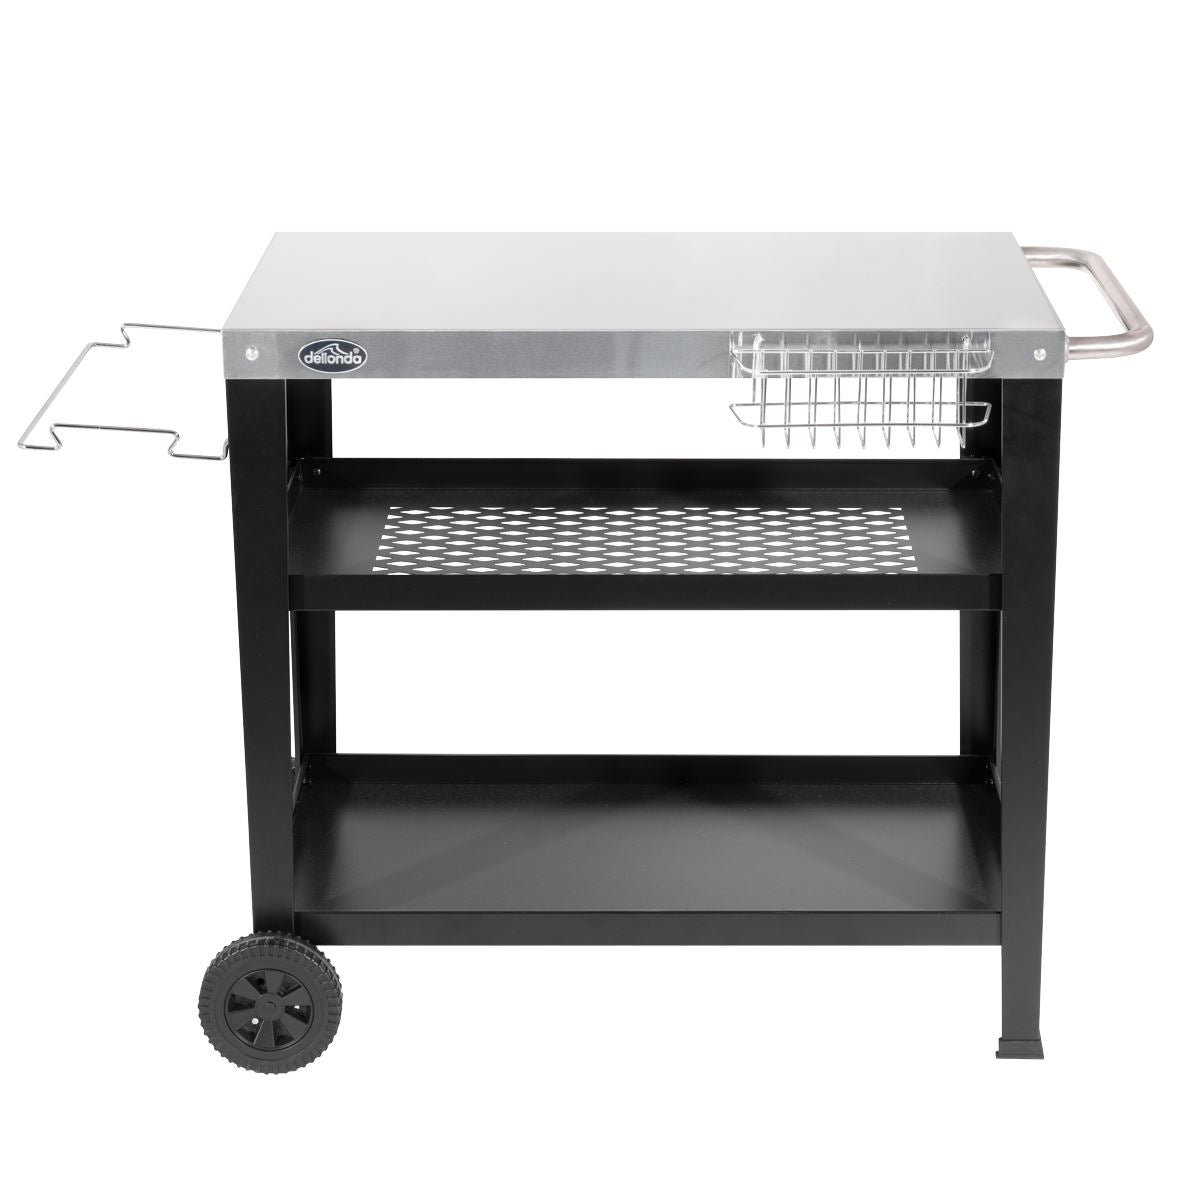 Dellonda Barbecue/Plancha Trolley for Outdoor Grilling/Cooking with Utensil Holder, Stainless Steel